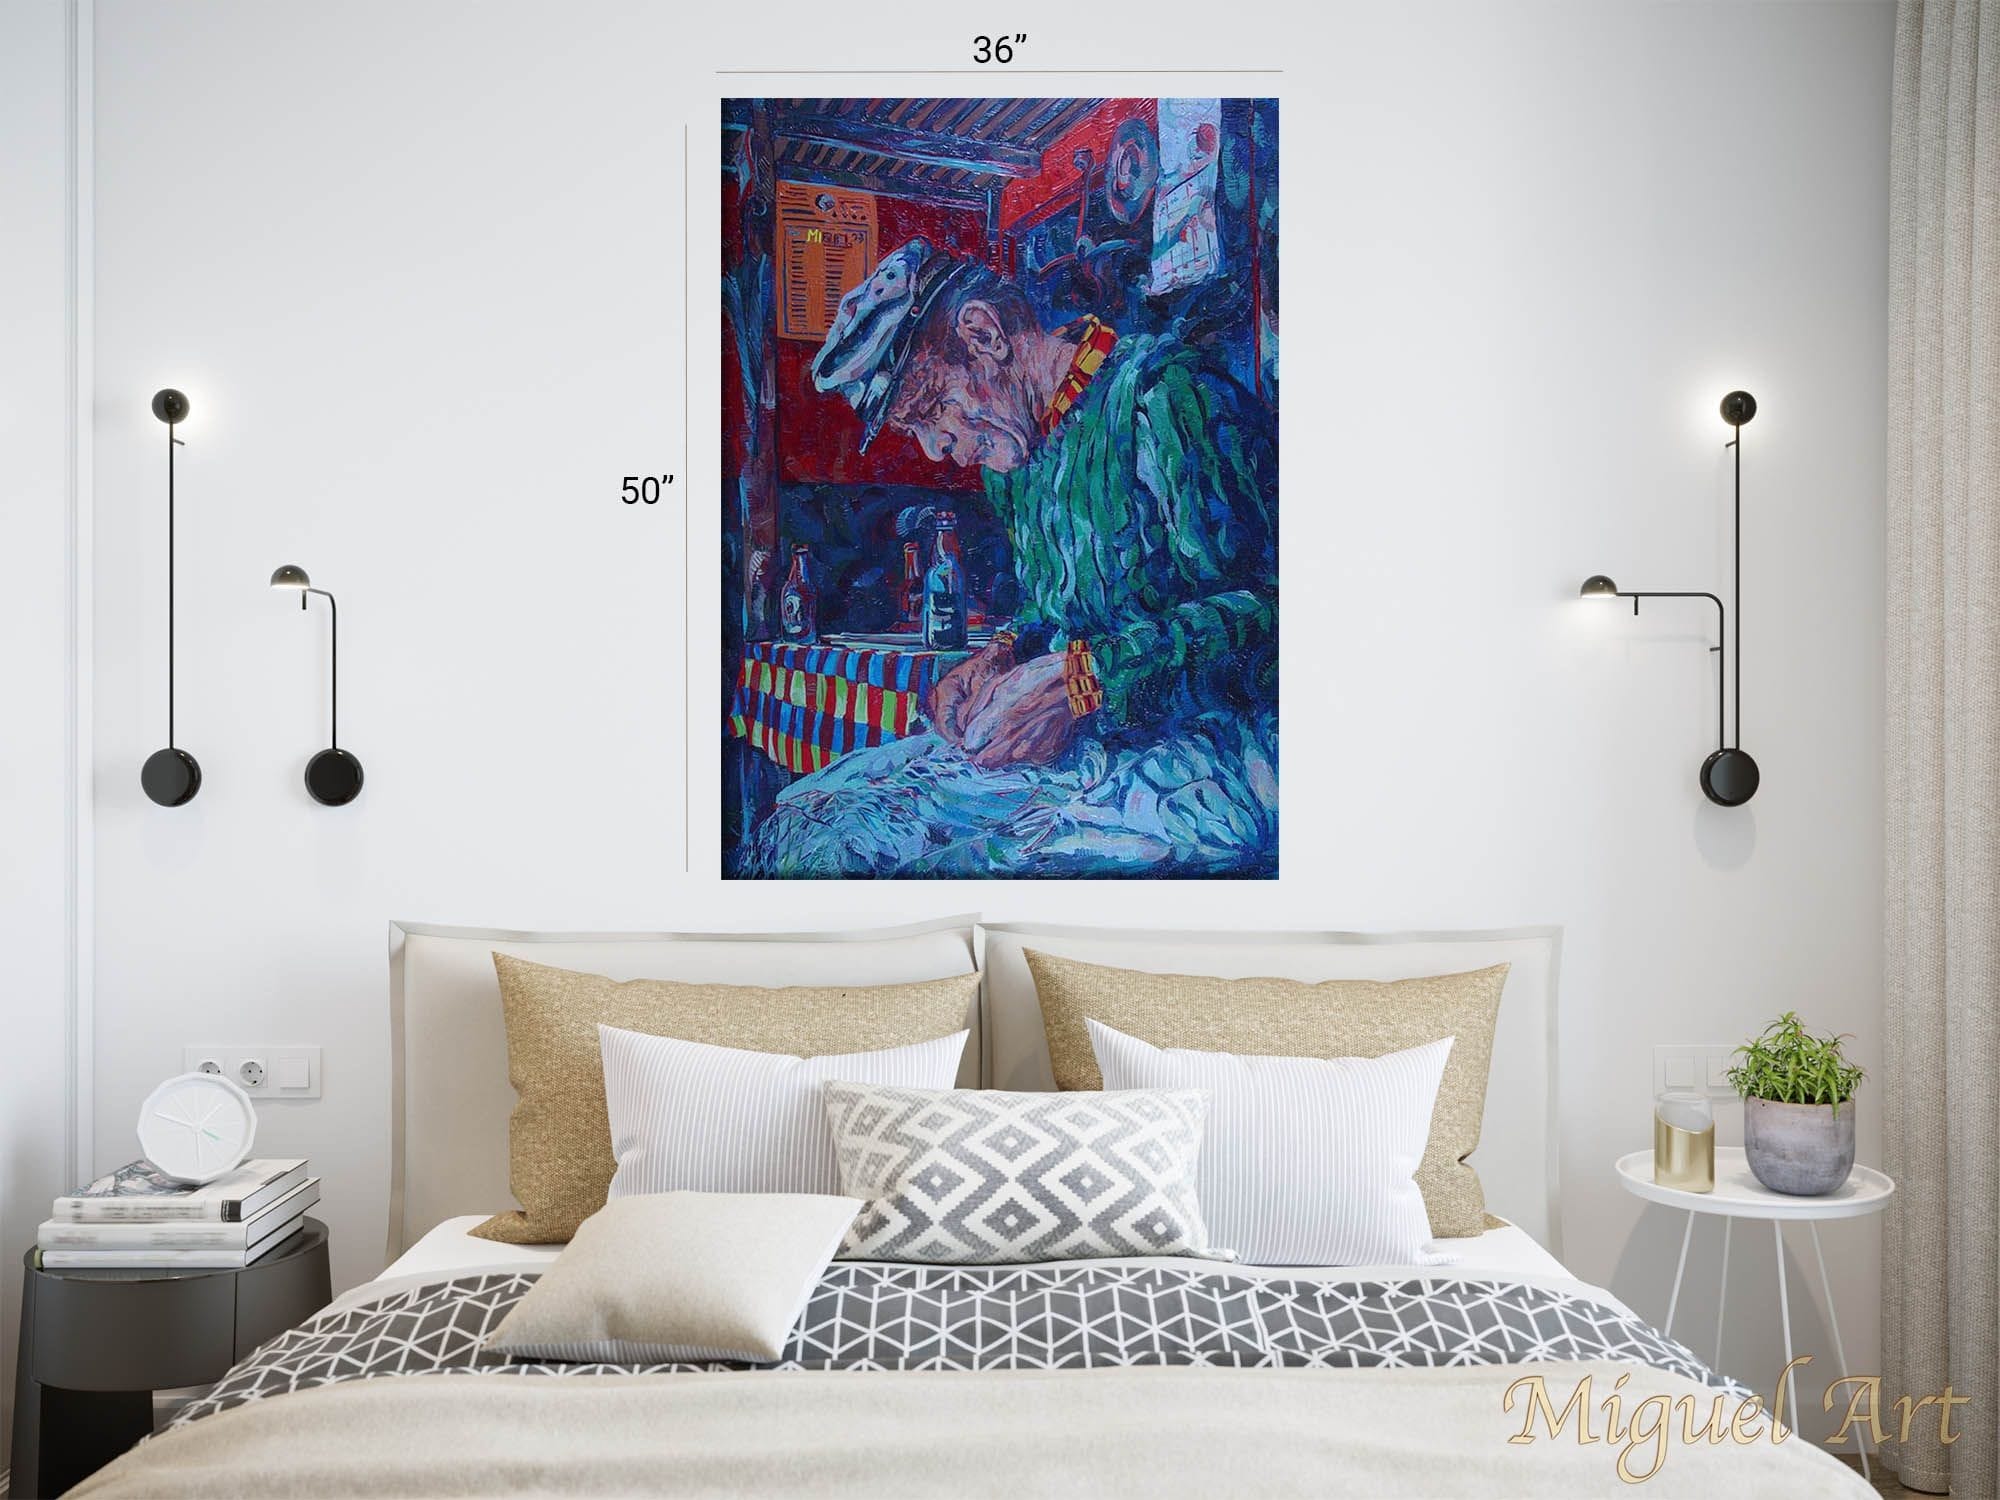 Painting of The Fisherman displayed on a white wall in a bedroom